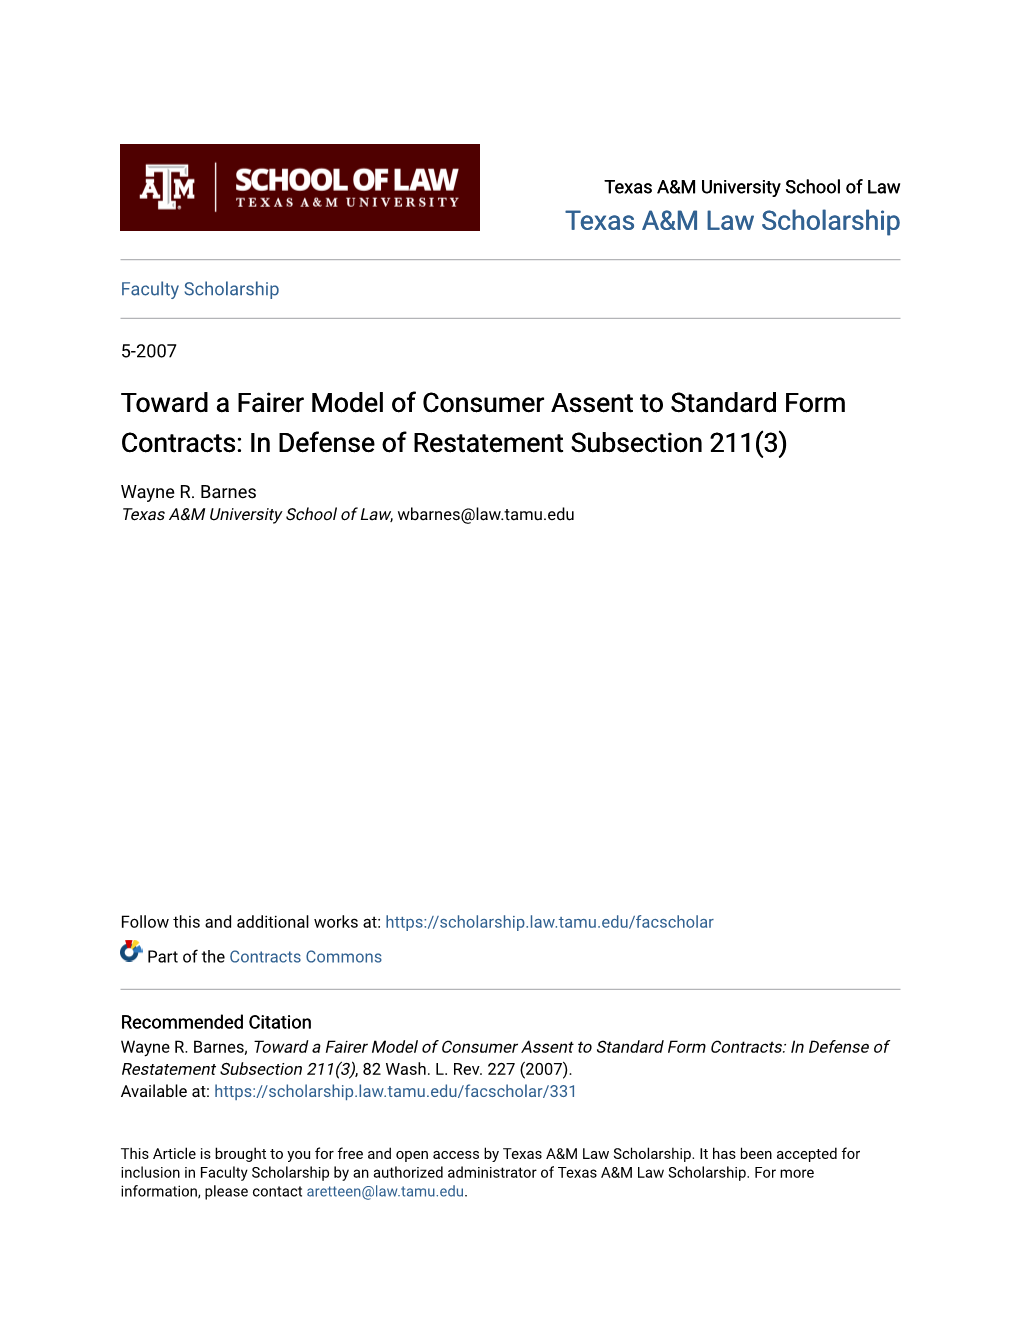 Toward a Fairer Model of Consumer Assent to Standard Form Contracts: in Defense of Restatement Subsection 211(3)